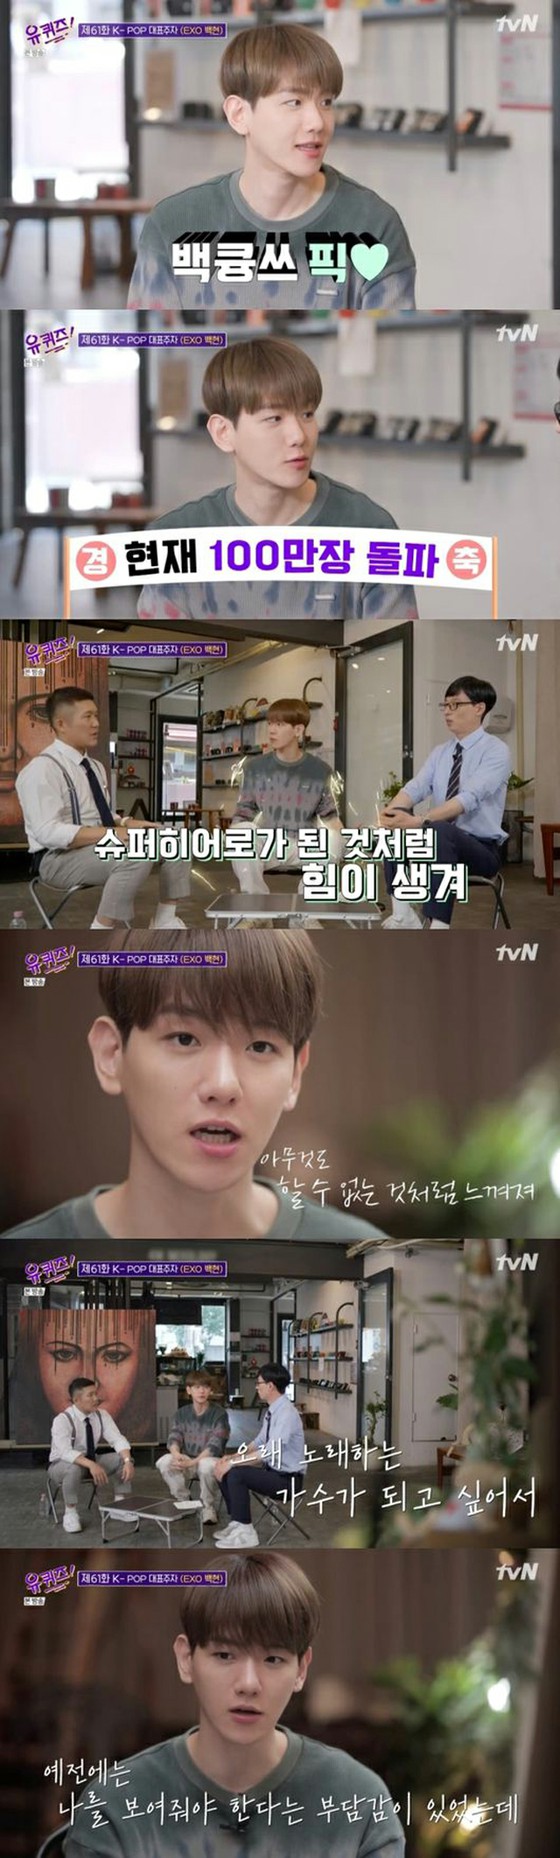 BAEK HYUN (EXO), looking back on his activities on the program, "I was fortunate to have met the members"